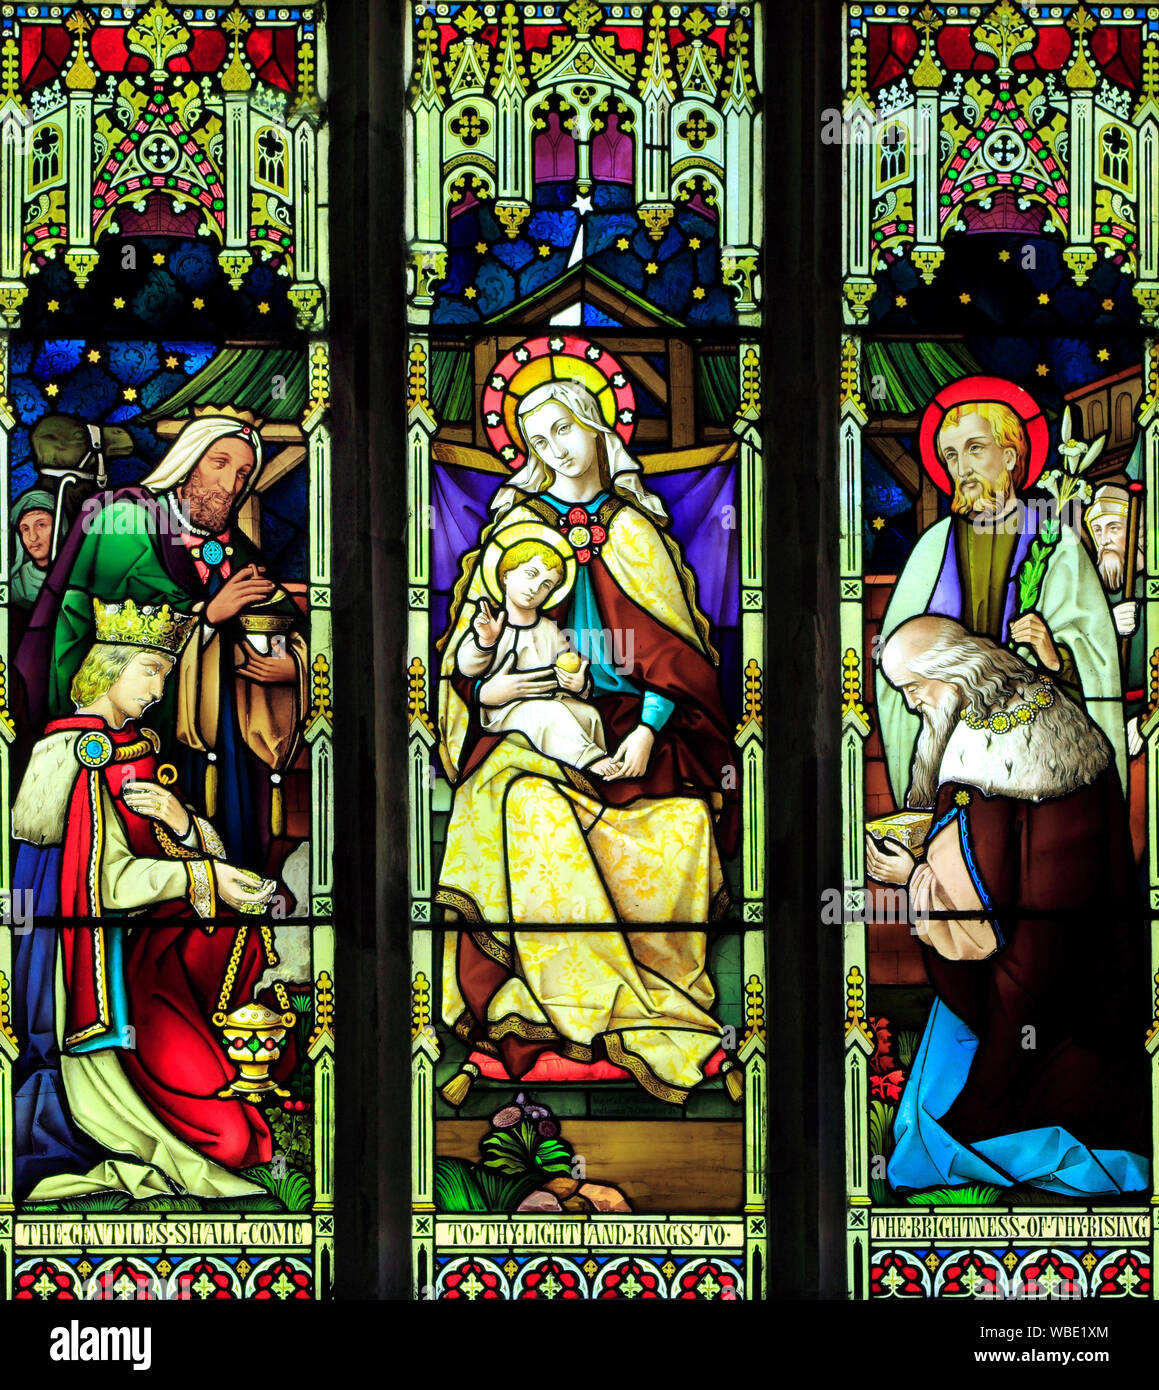 Epiphany,  Mary, Jesus,Three Kings, Wise Men, stained glass window by Mayer & Co. 1873, Brinton, Norfolk, UK Stock Photo